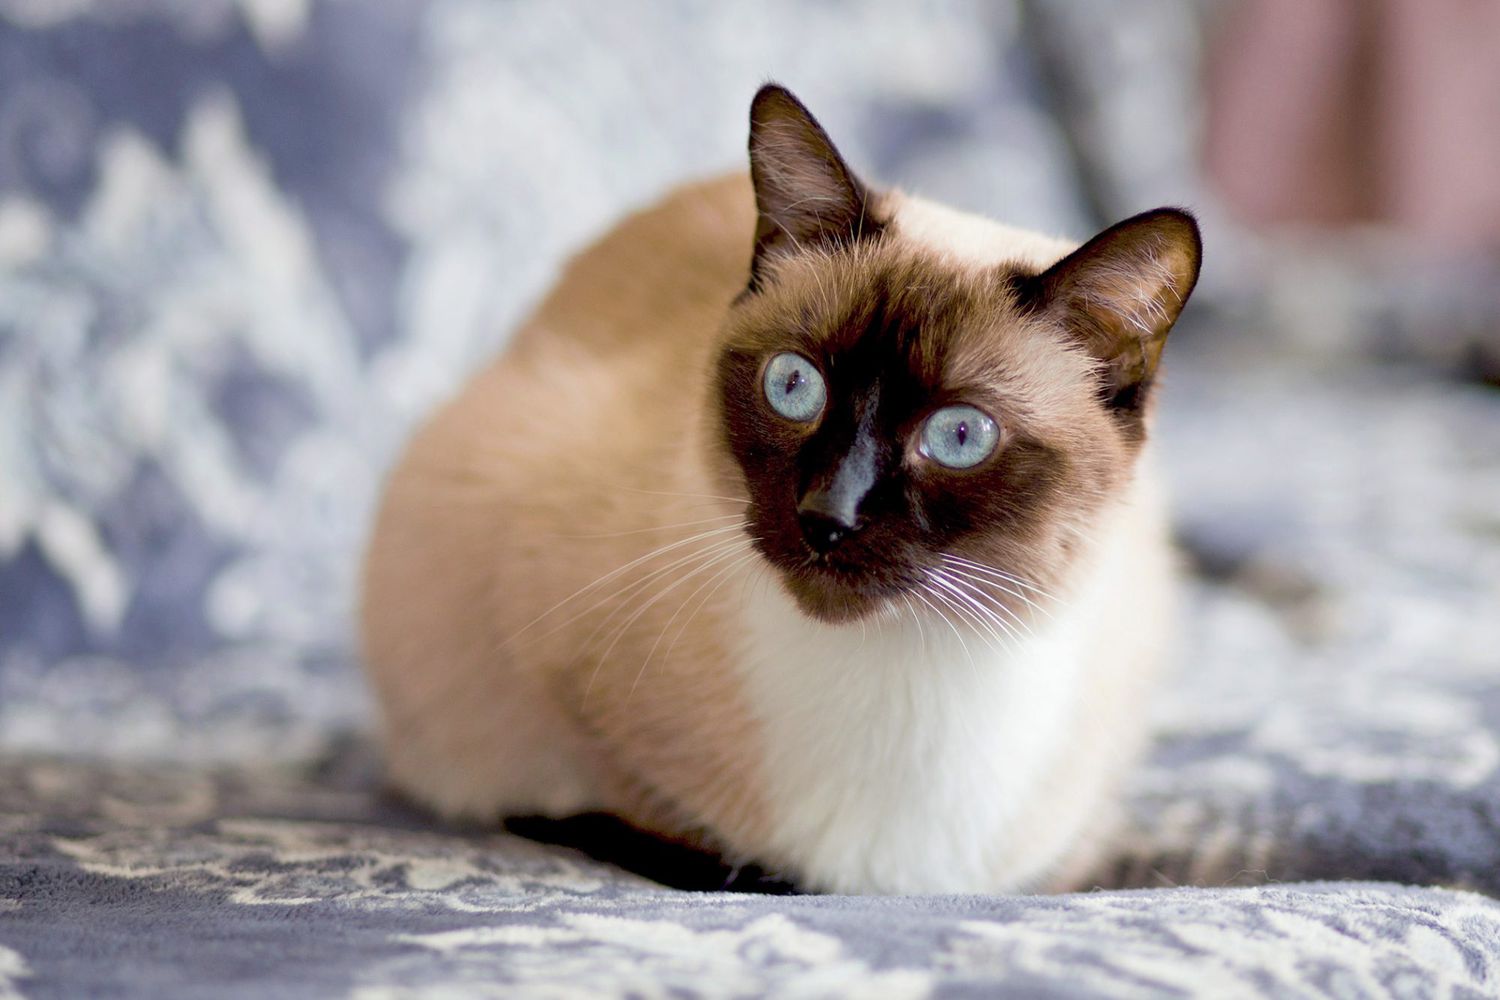 250 Japanese Cat Names For Your New Feline Friend Catological